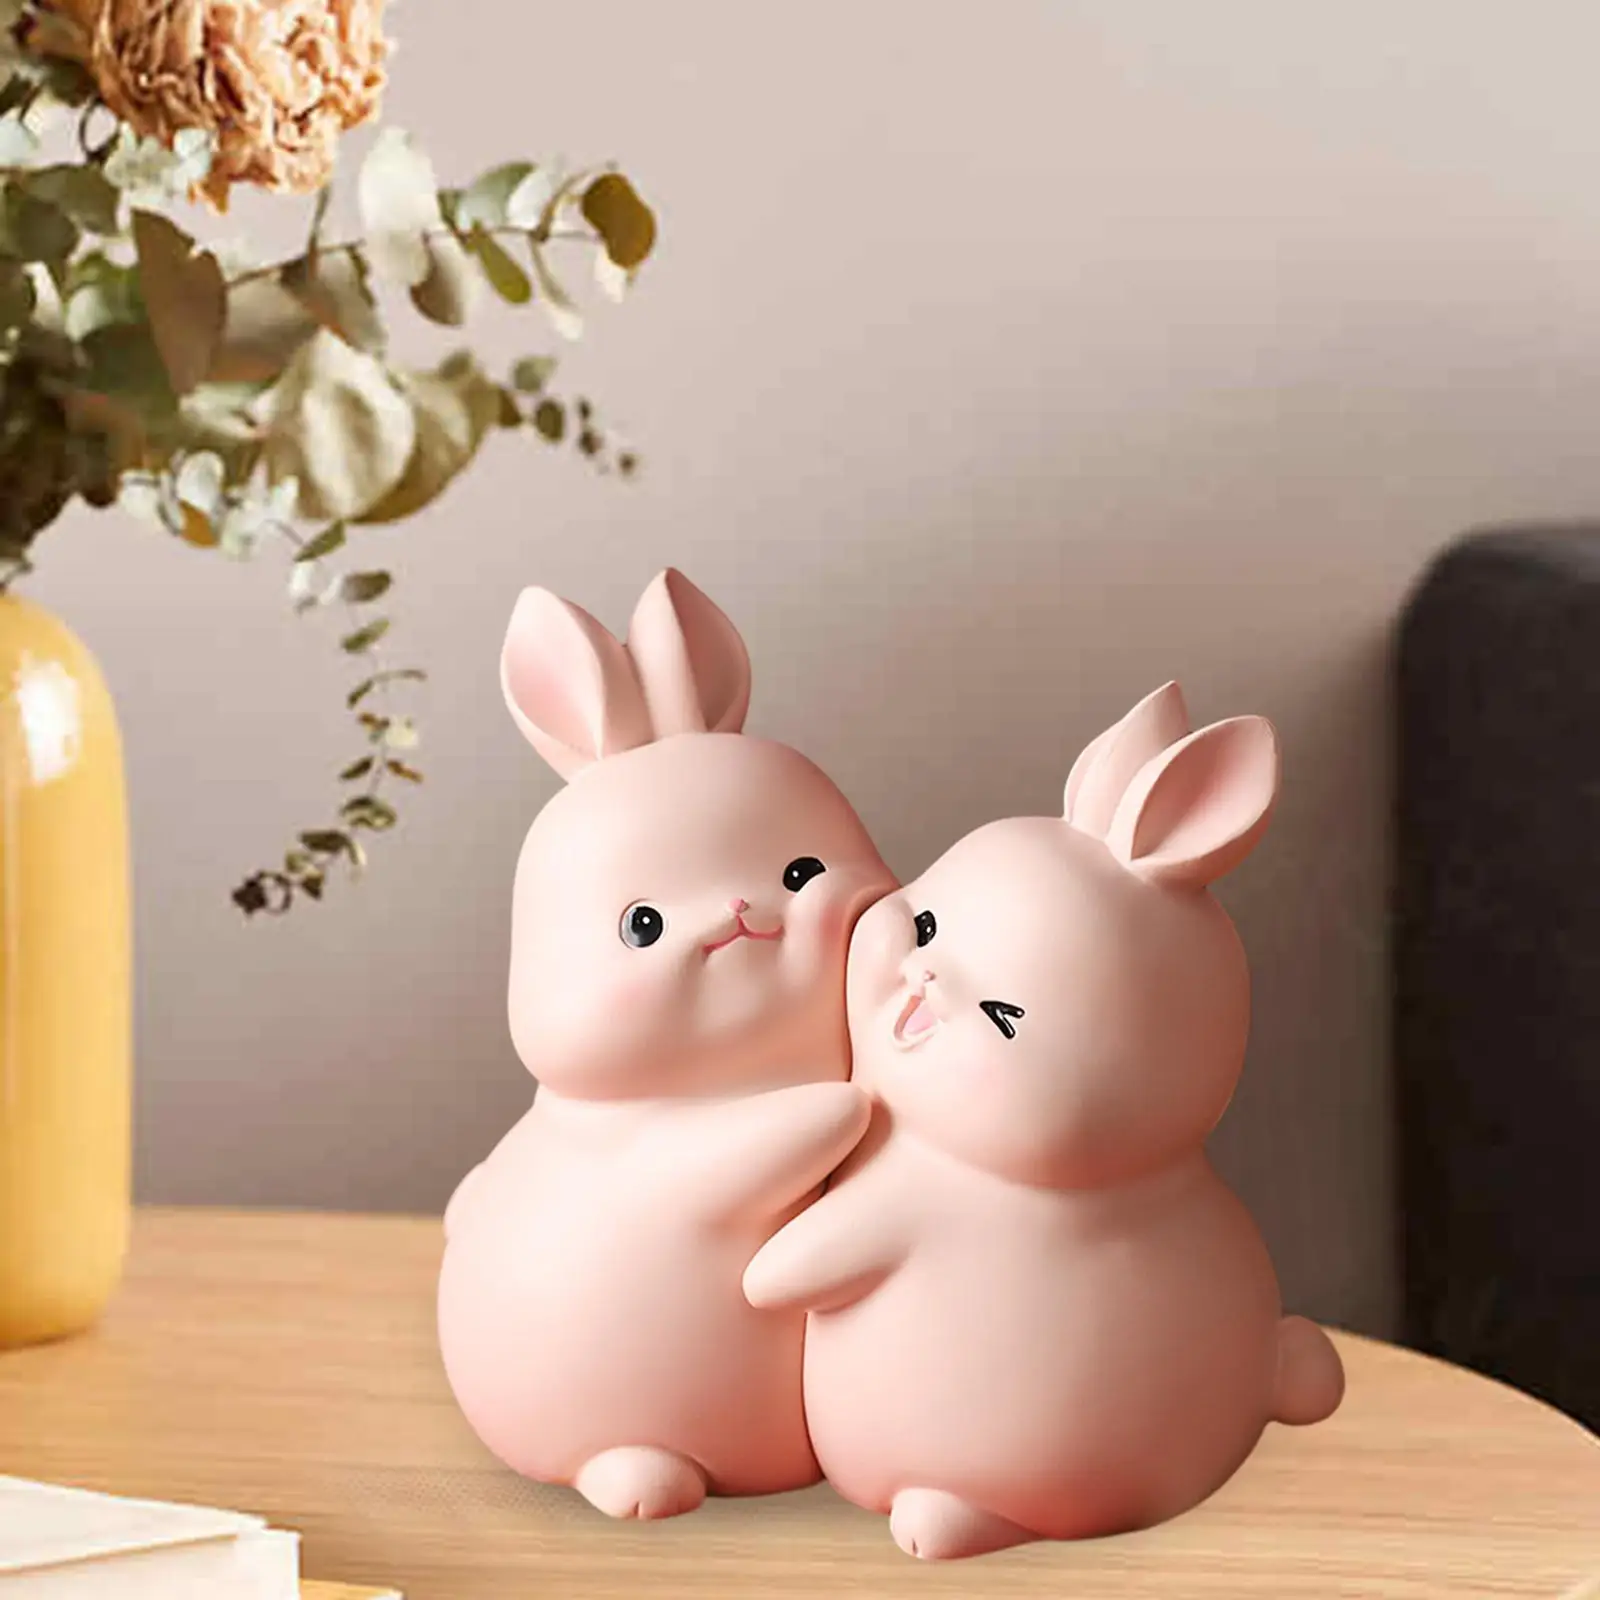 Rabbit Bookends Bunny Book Ends Stopper Cute Resin Figurines Statues Kids Bookends for Shelves Kids Rooms Cabinet Desk Ornaments